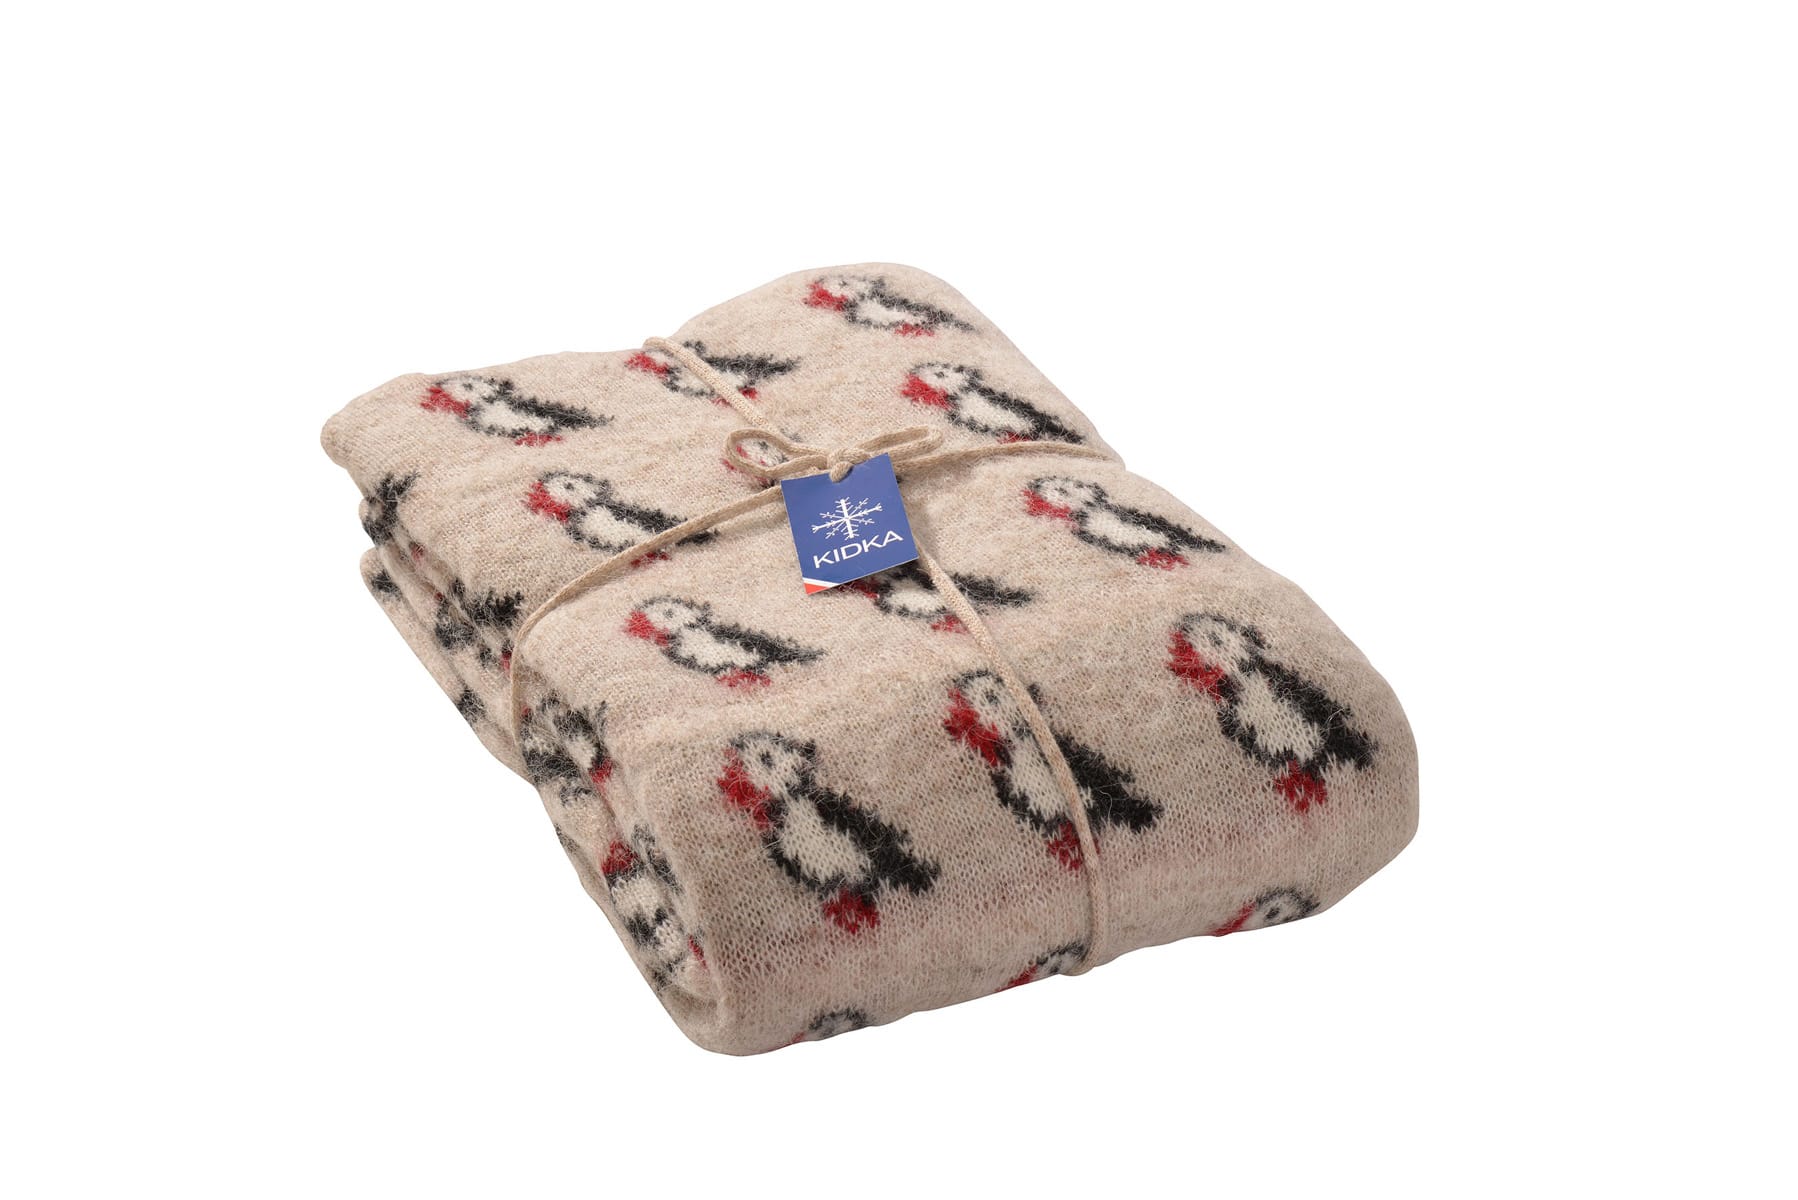 Wool blanket with puffin pattern from Iceland. Perfect gift for bird lovers.